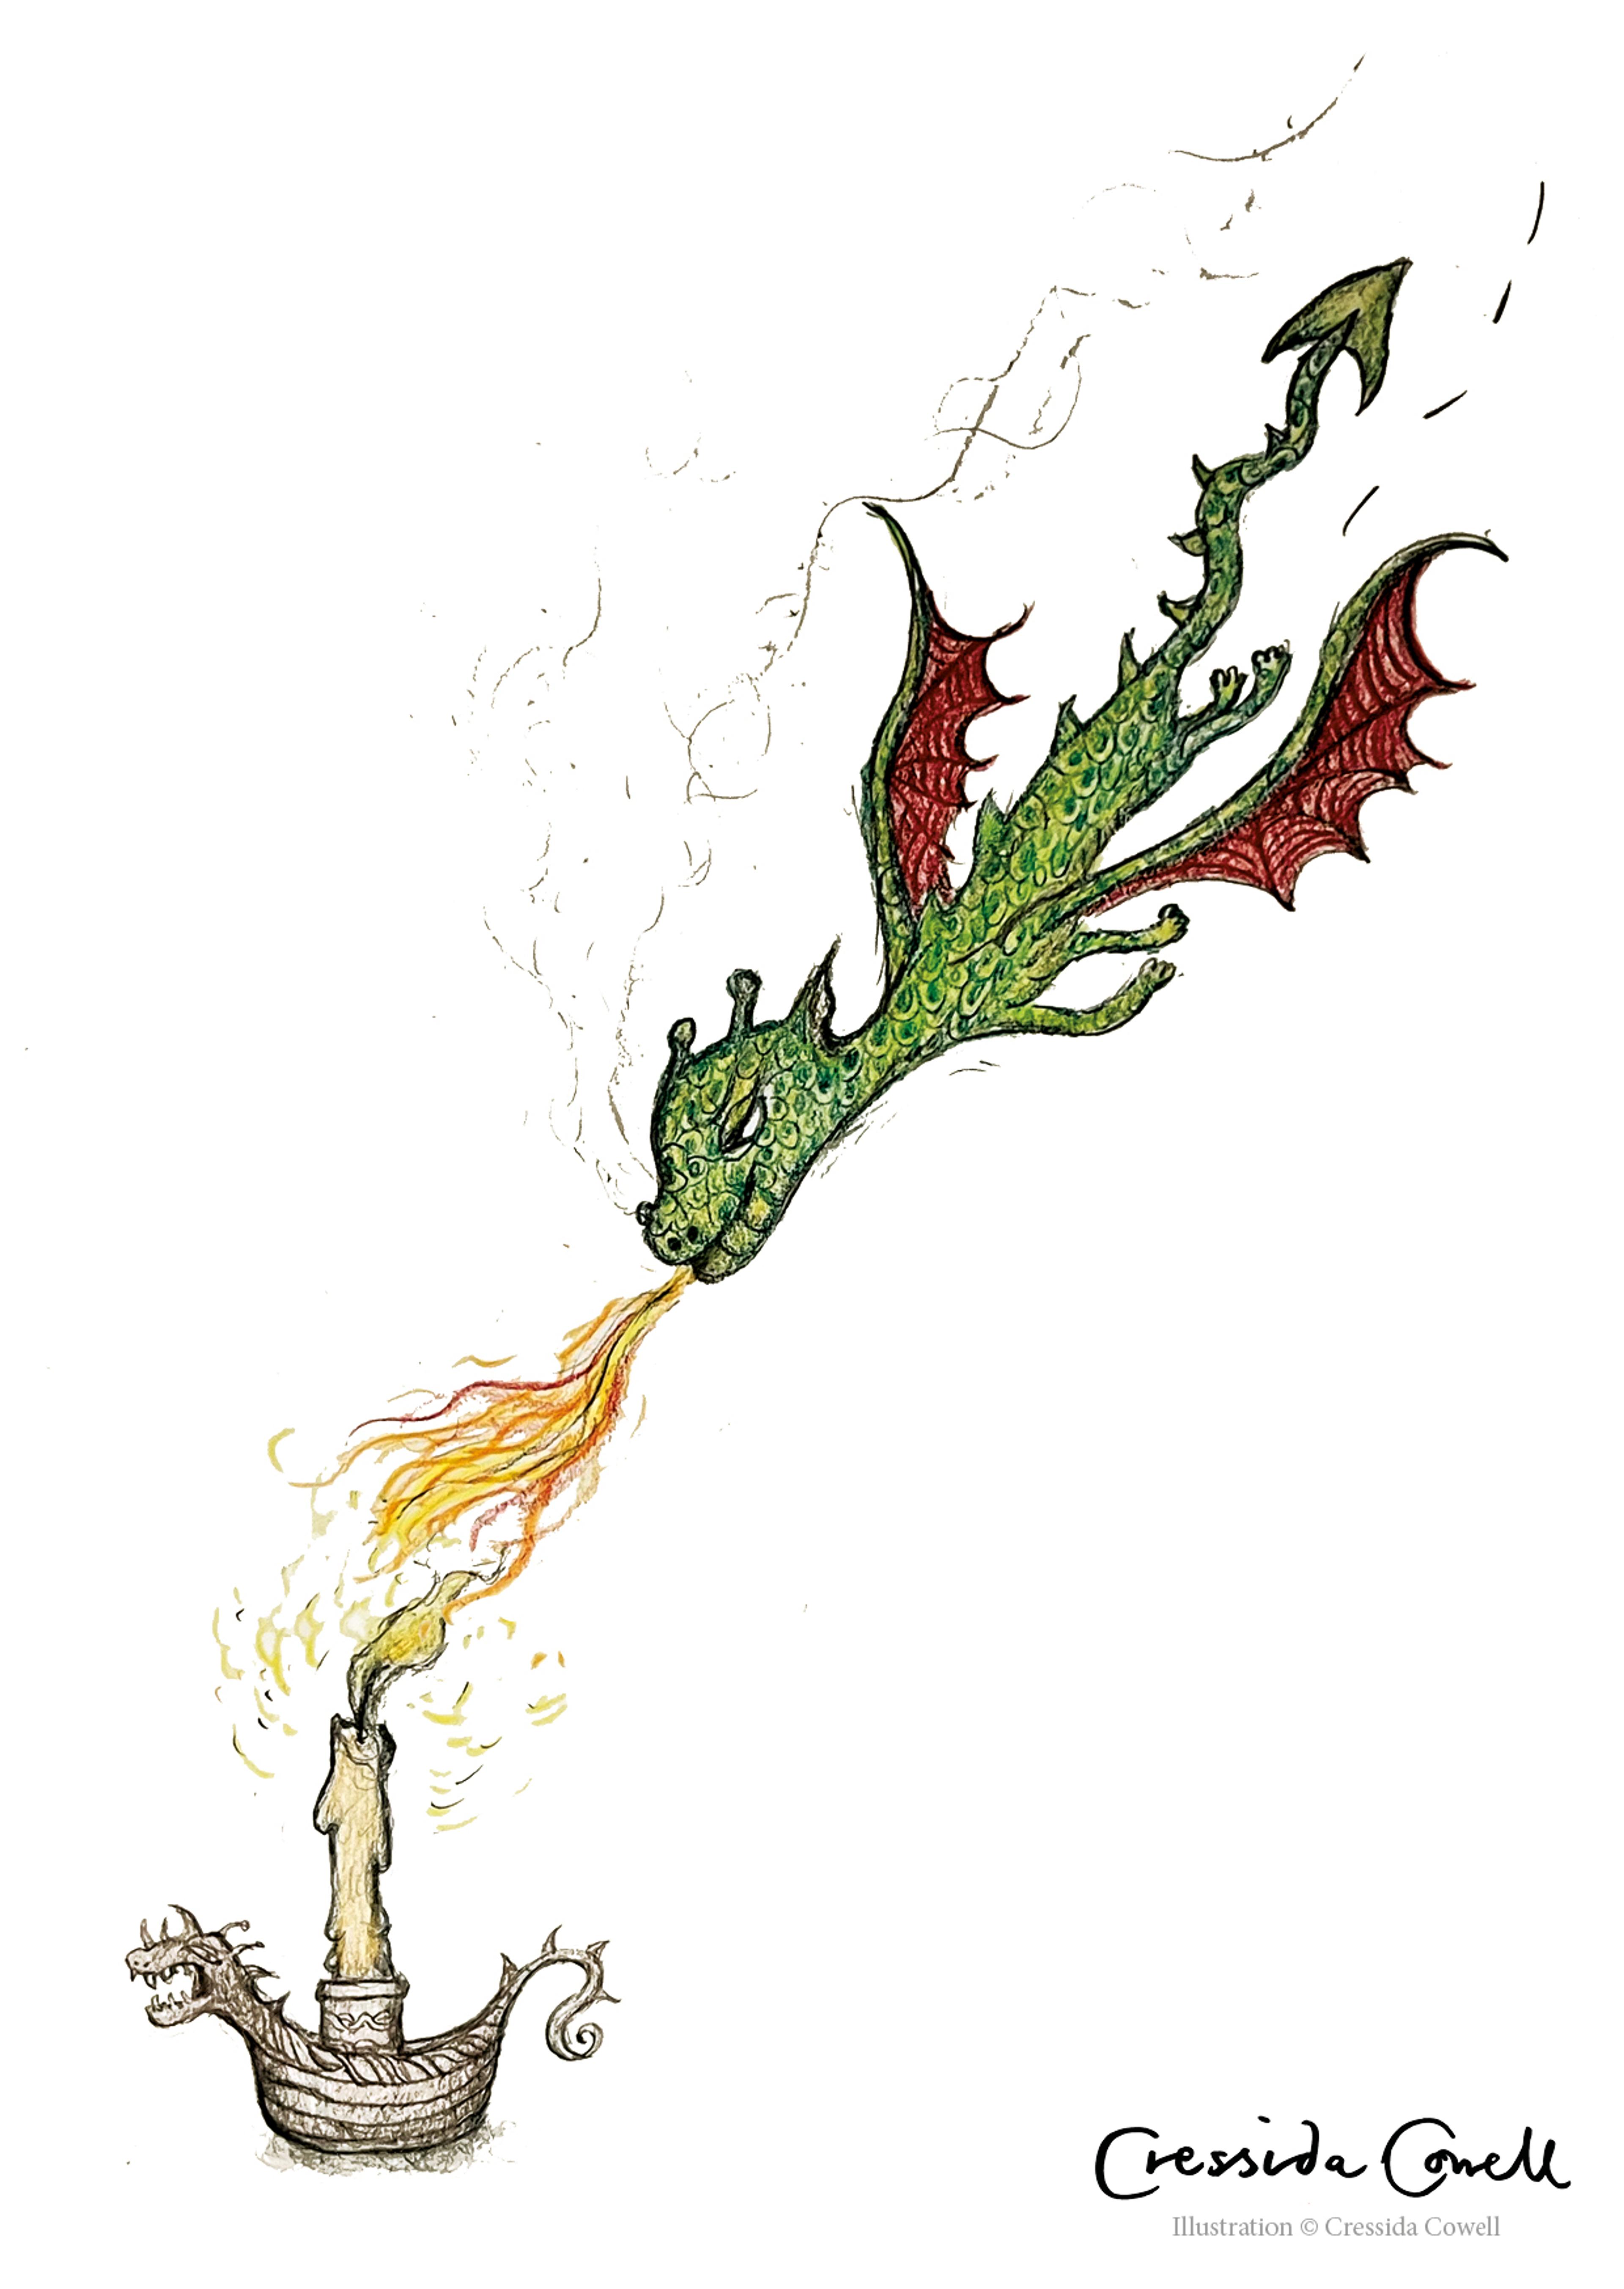 Illustration of a dragon breathing fire to light a candle